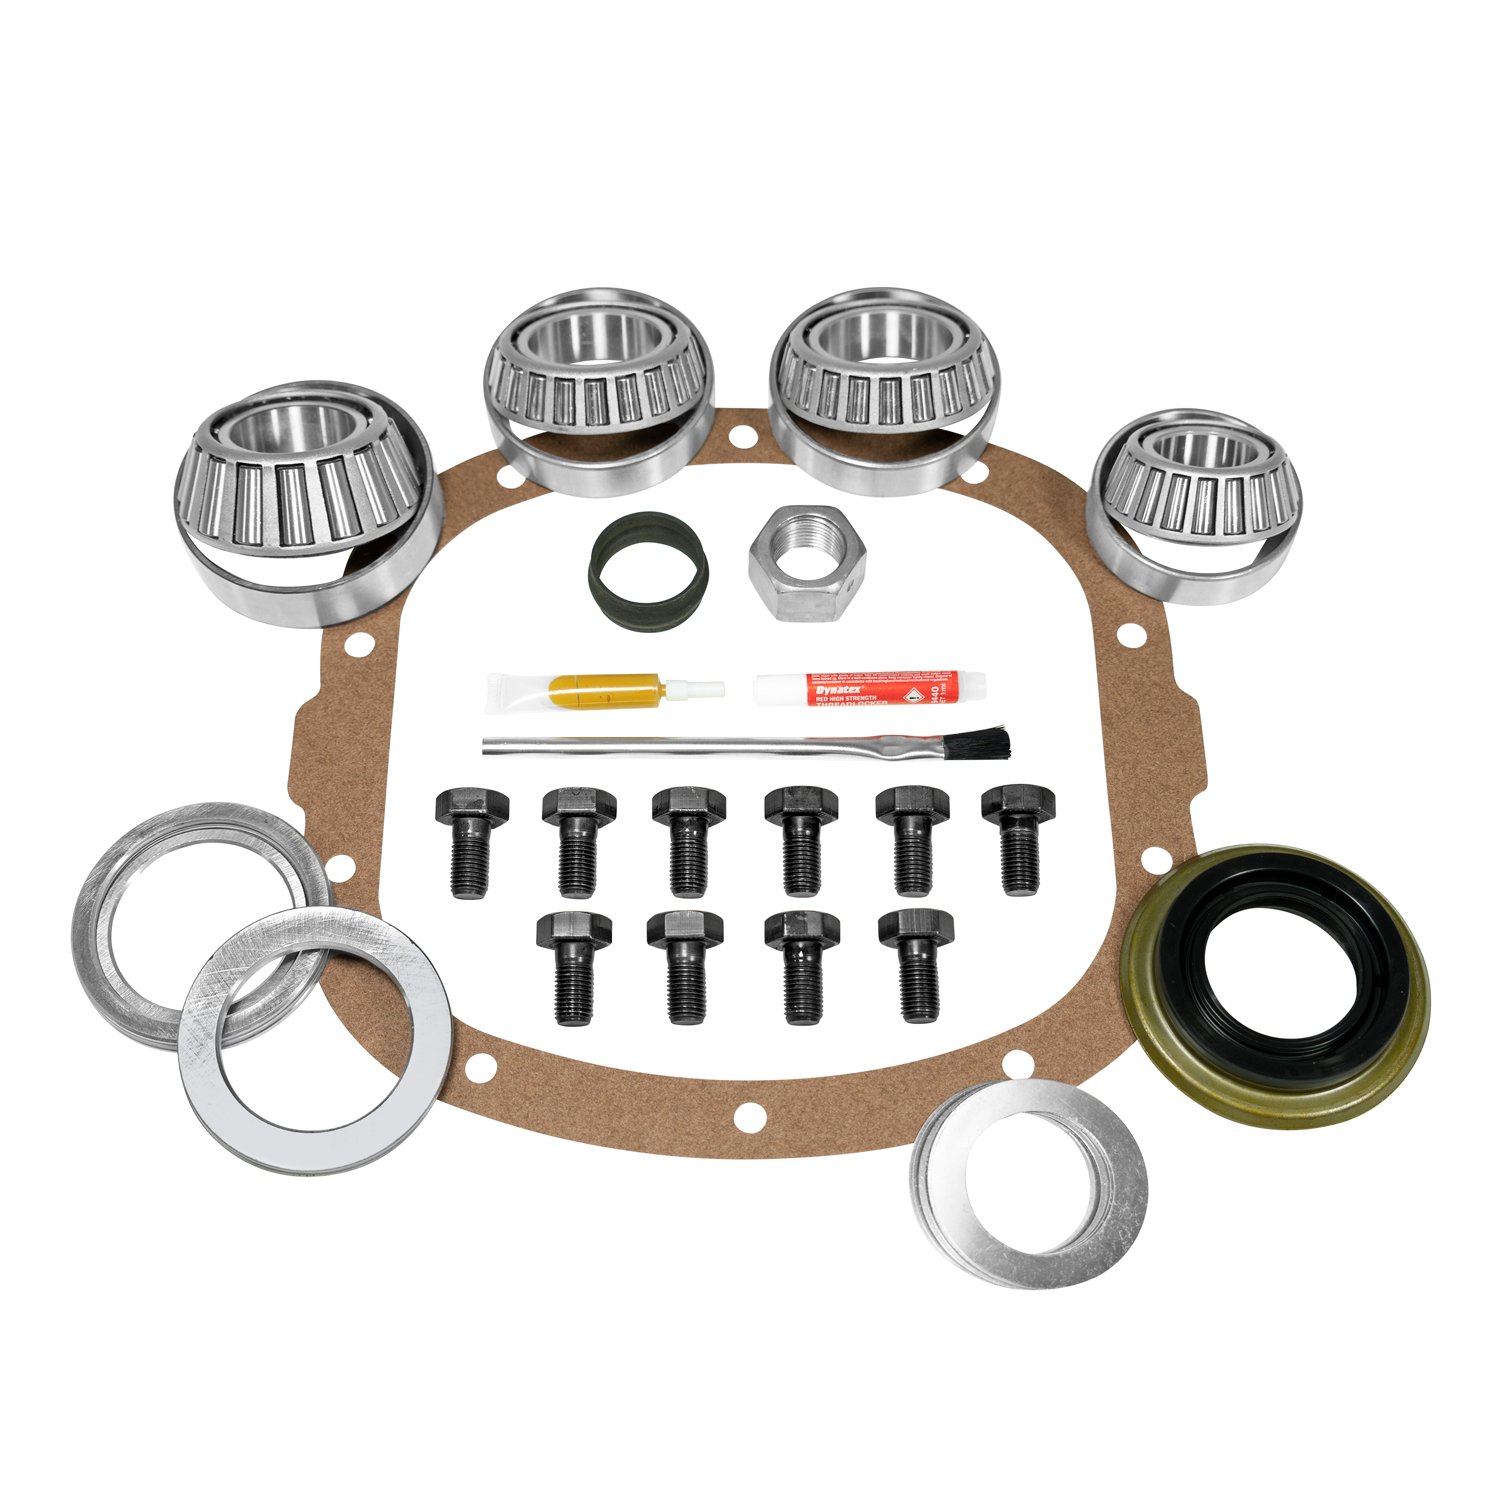 USA Standard ZK GM7.5-C Master Overhaul Kit, For 2000-Newer GM 7.5 in. And 7.625 in. Differential